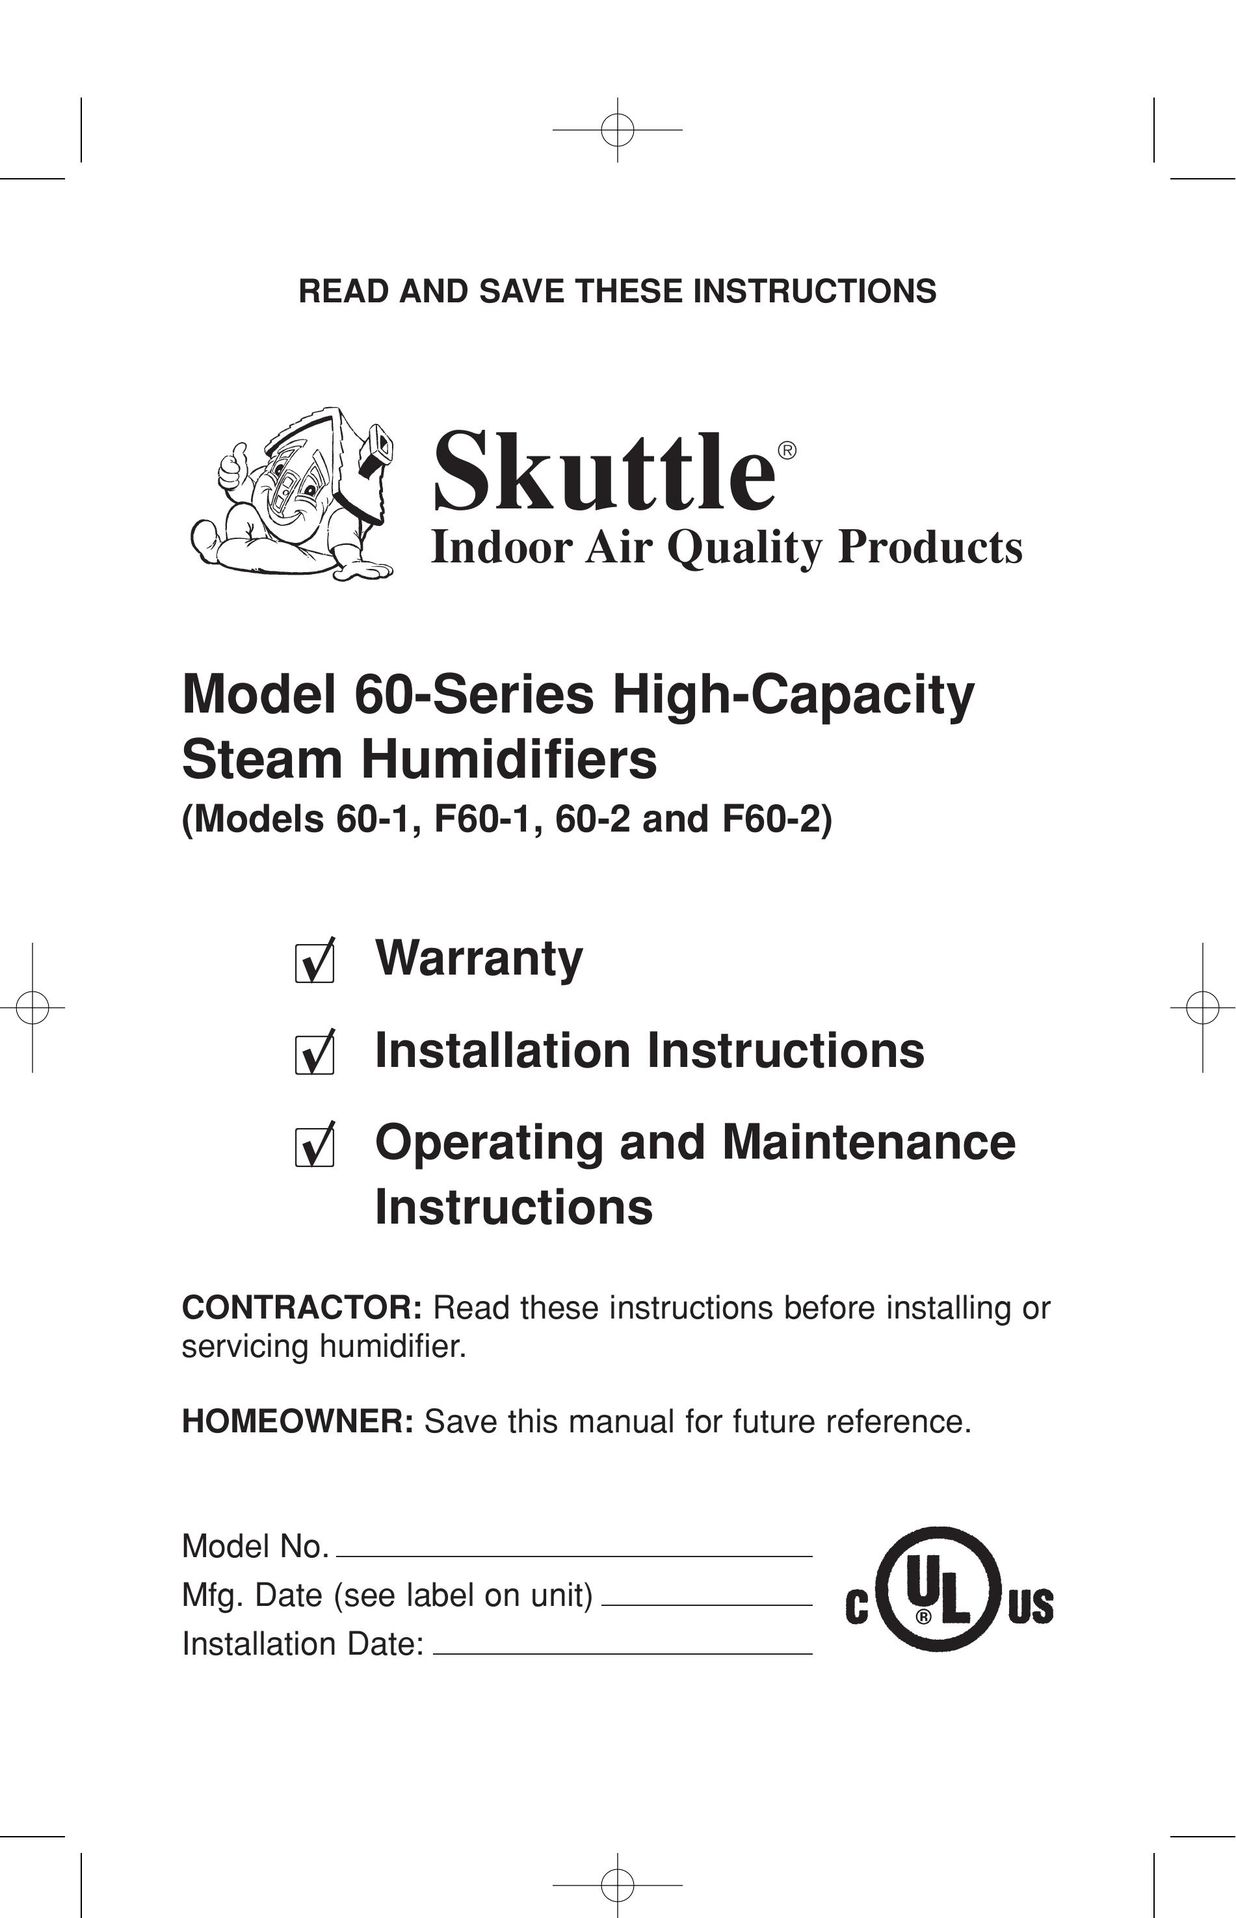 Skuttle Indoor Air Quality Products 60-1 Humidifier User Manual